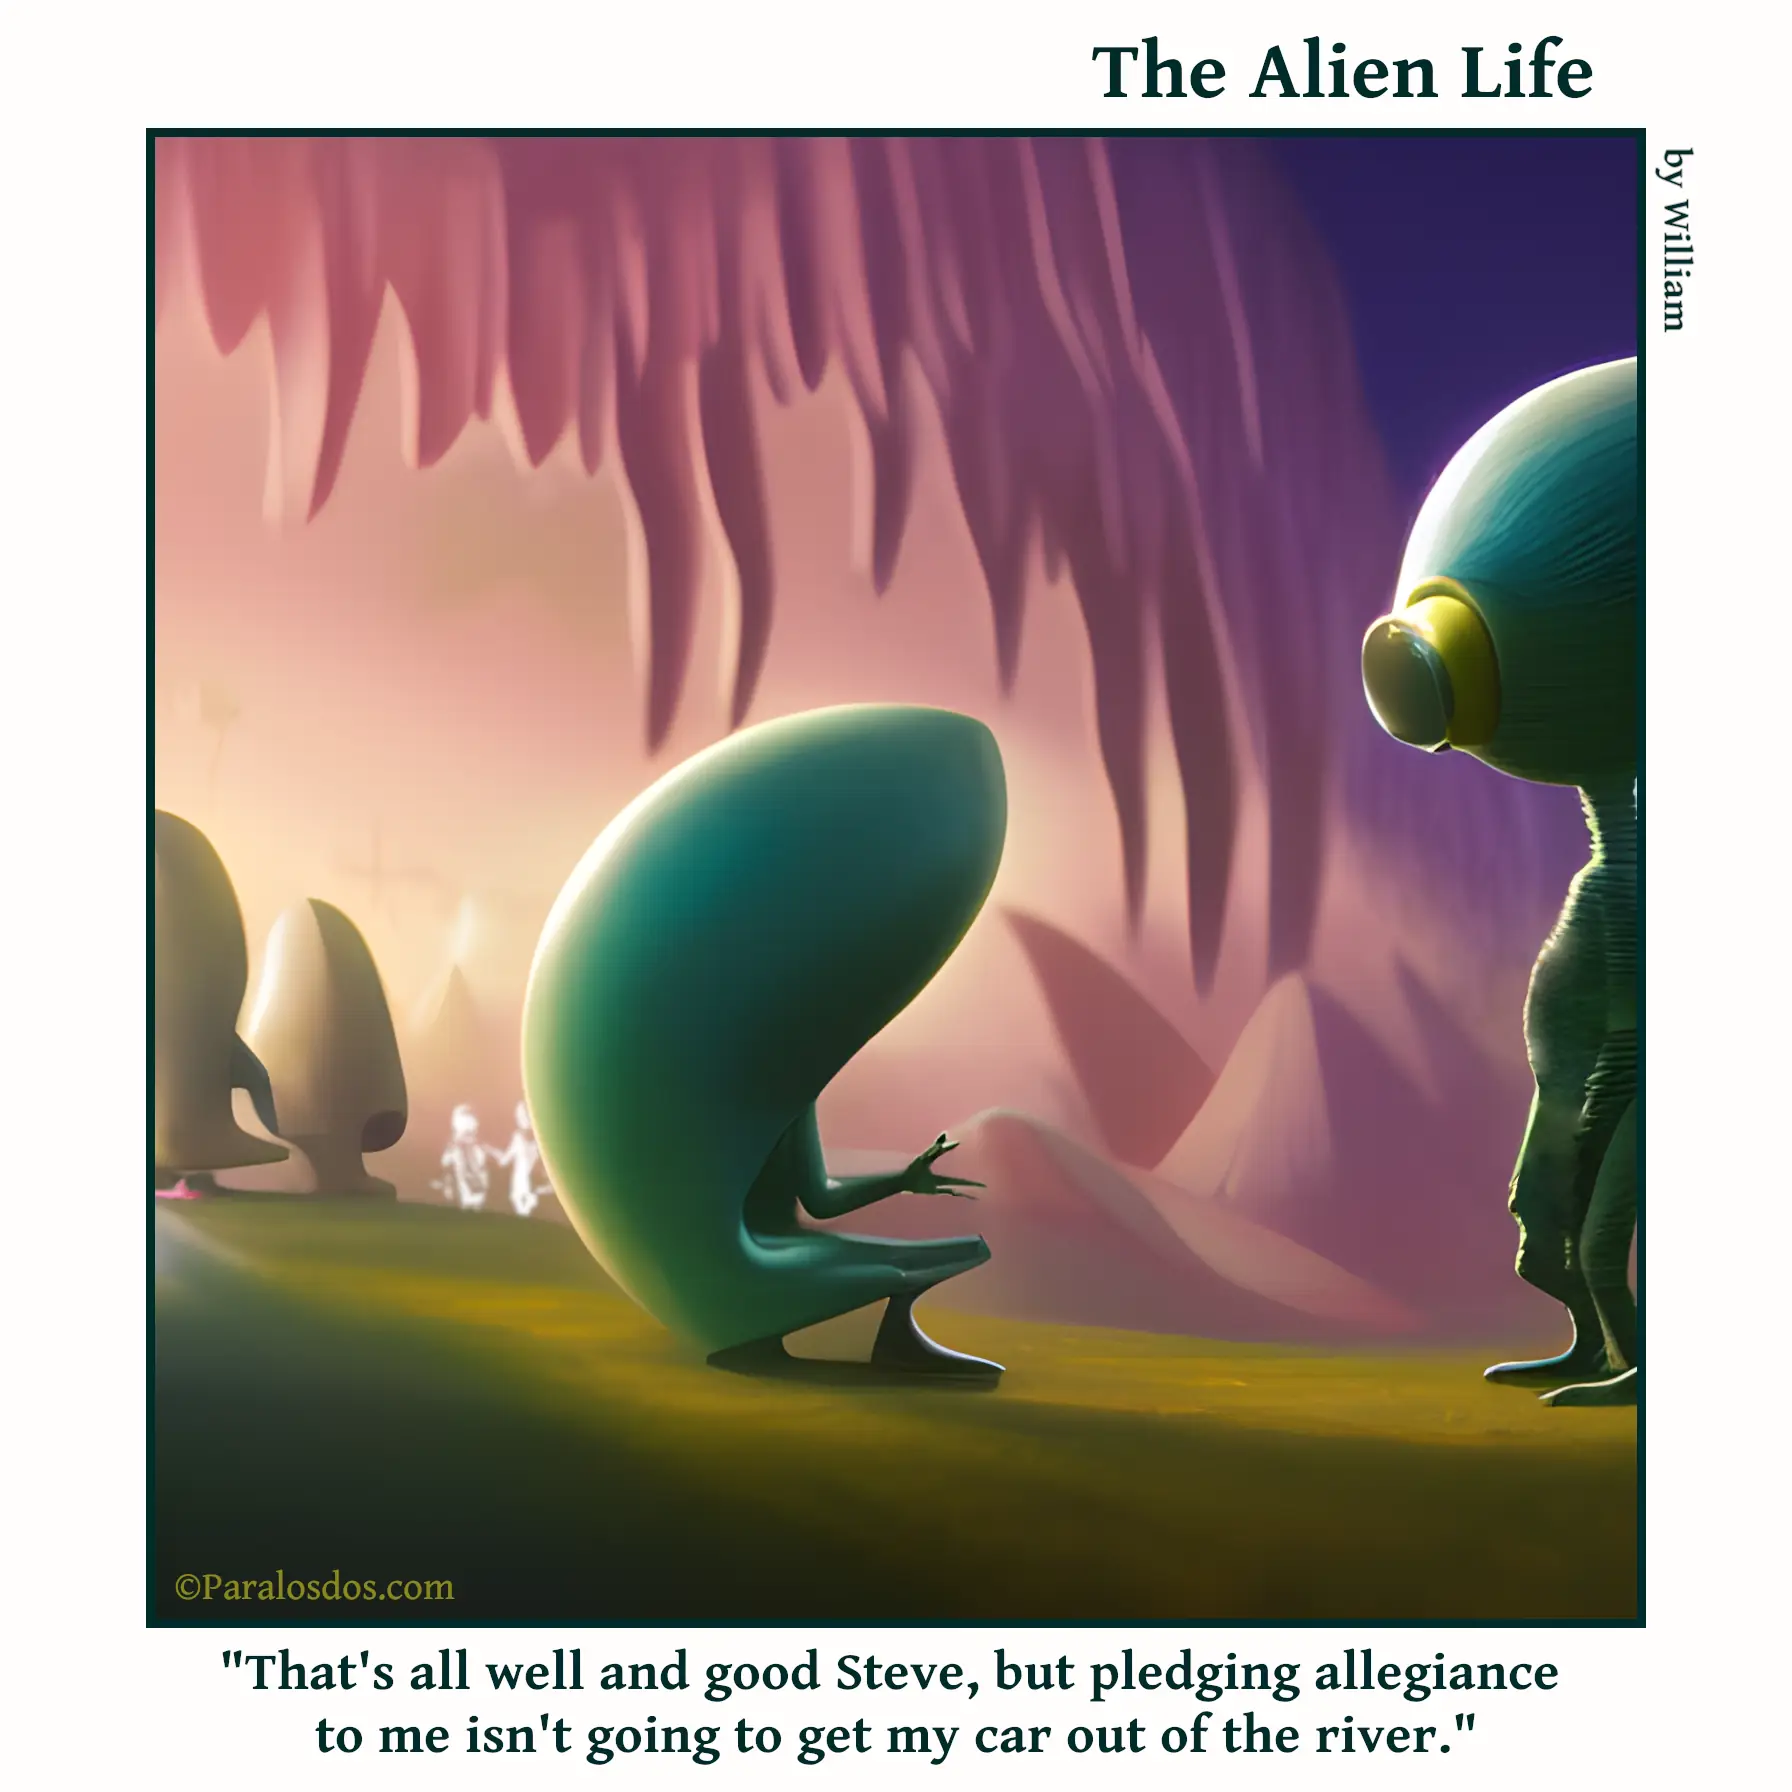 The Alien Life, one panel Comic. An alien is bowing low before another alien. The caption reads: "That's all well and good Steve, but pledging allegiance to me isn't going to get my car out of the river."